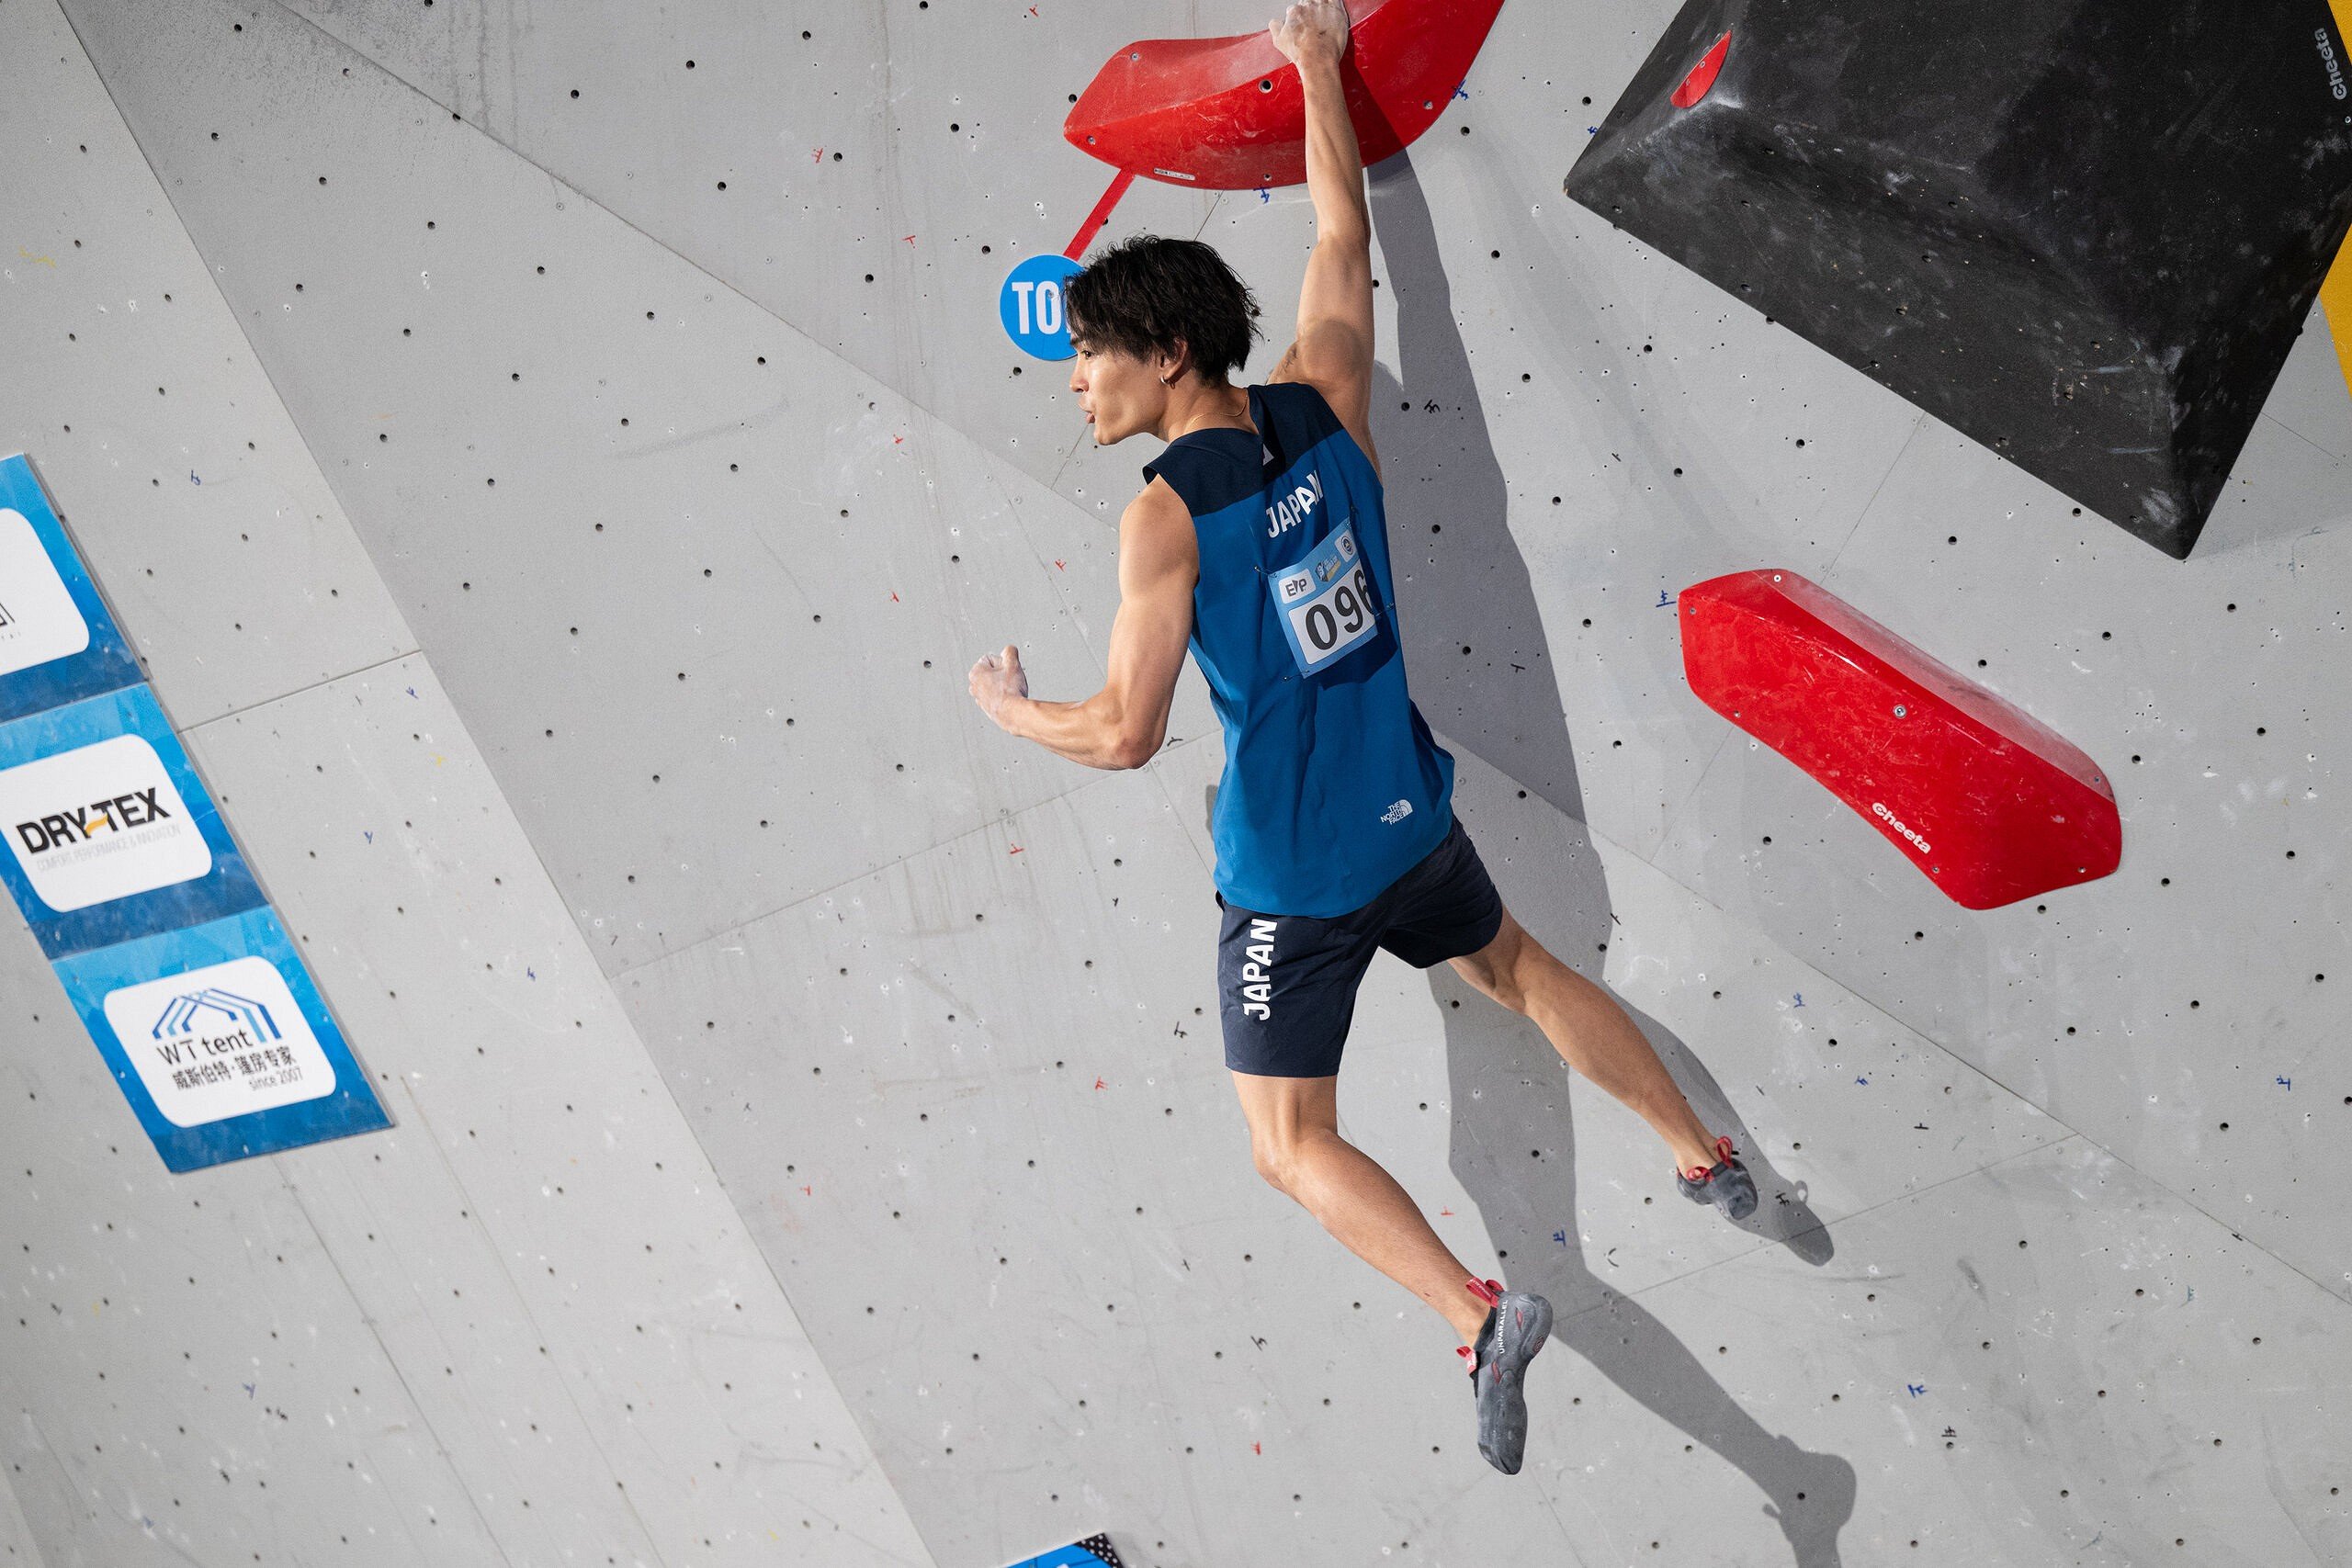 Tomoa Narasaki (JPN) won the first World Cup of the season after qualifying for Paris 2024 last year.  © IFSC